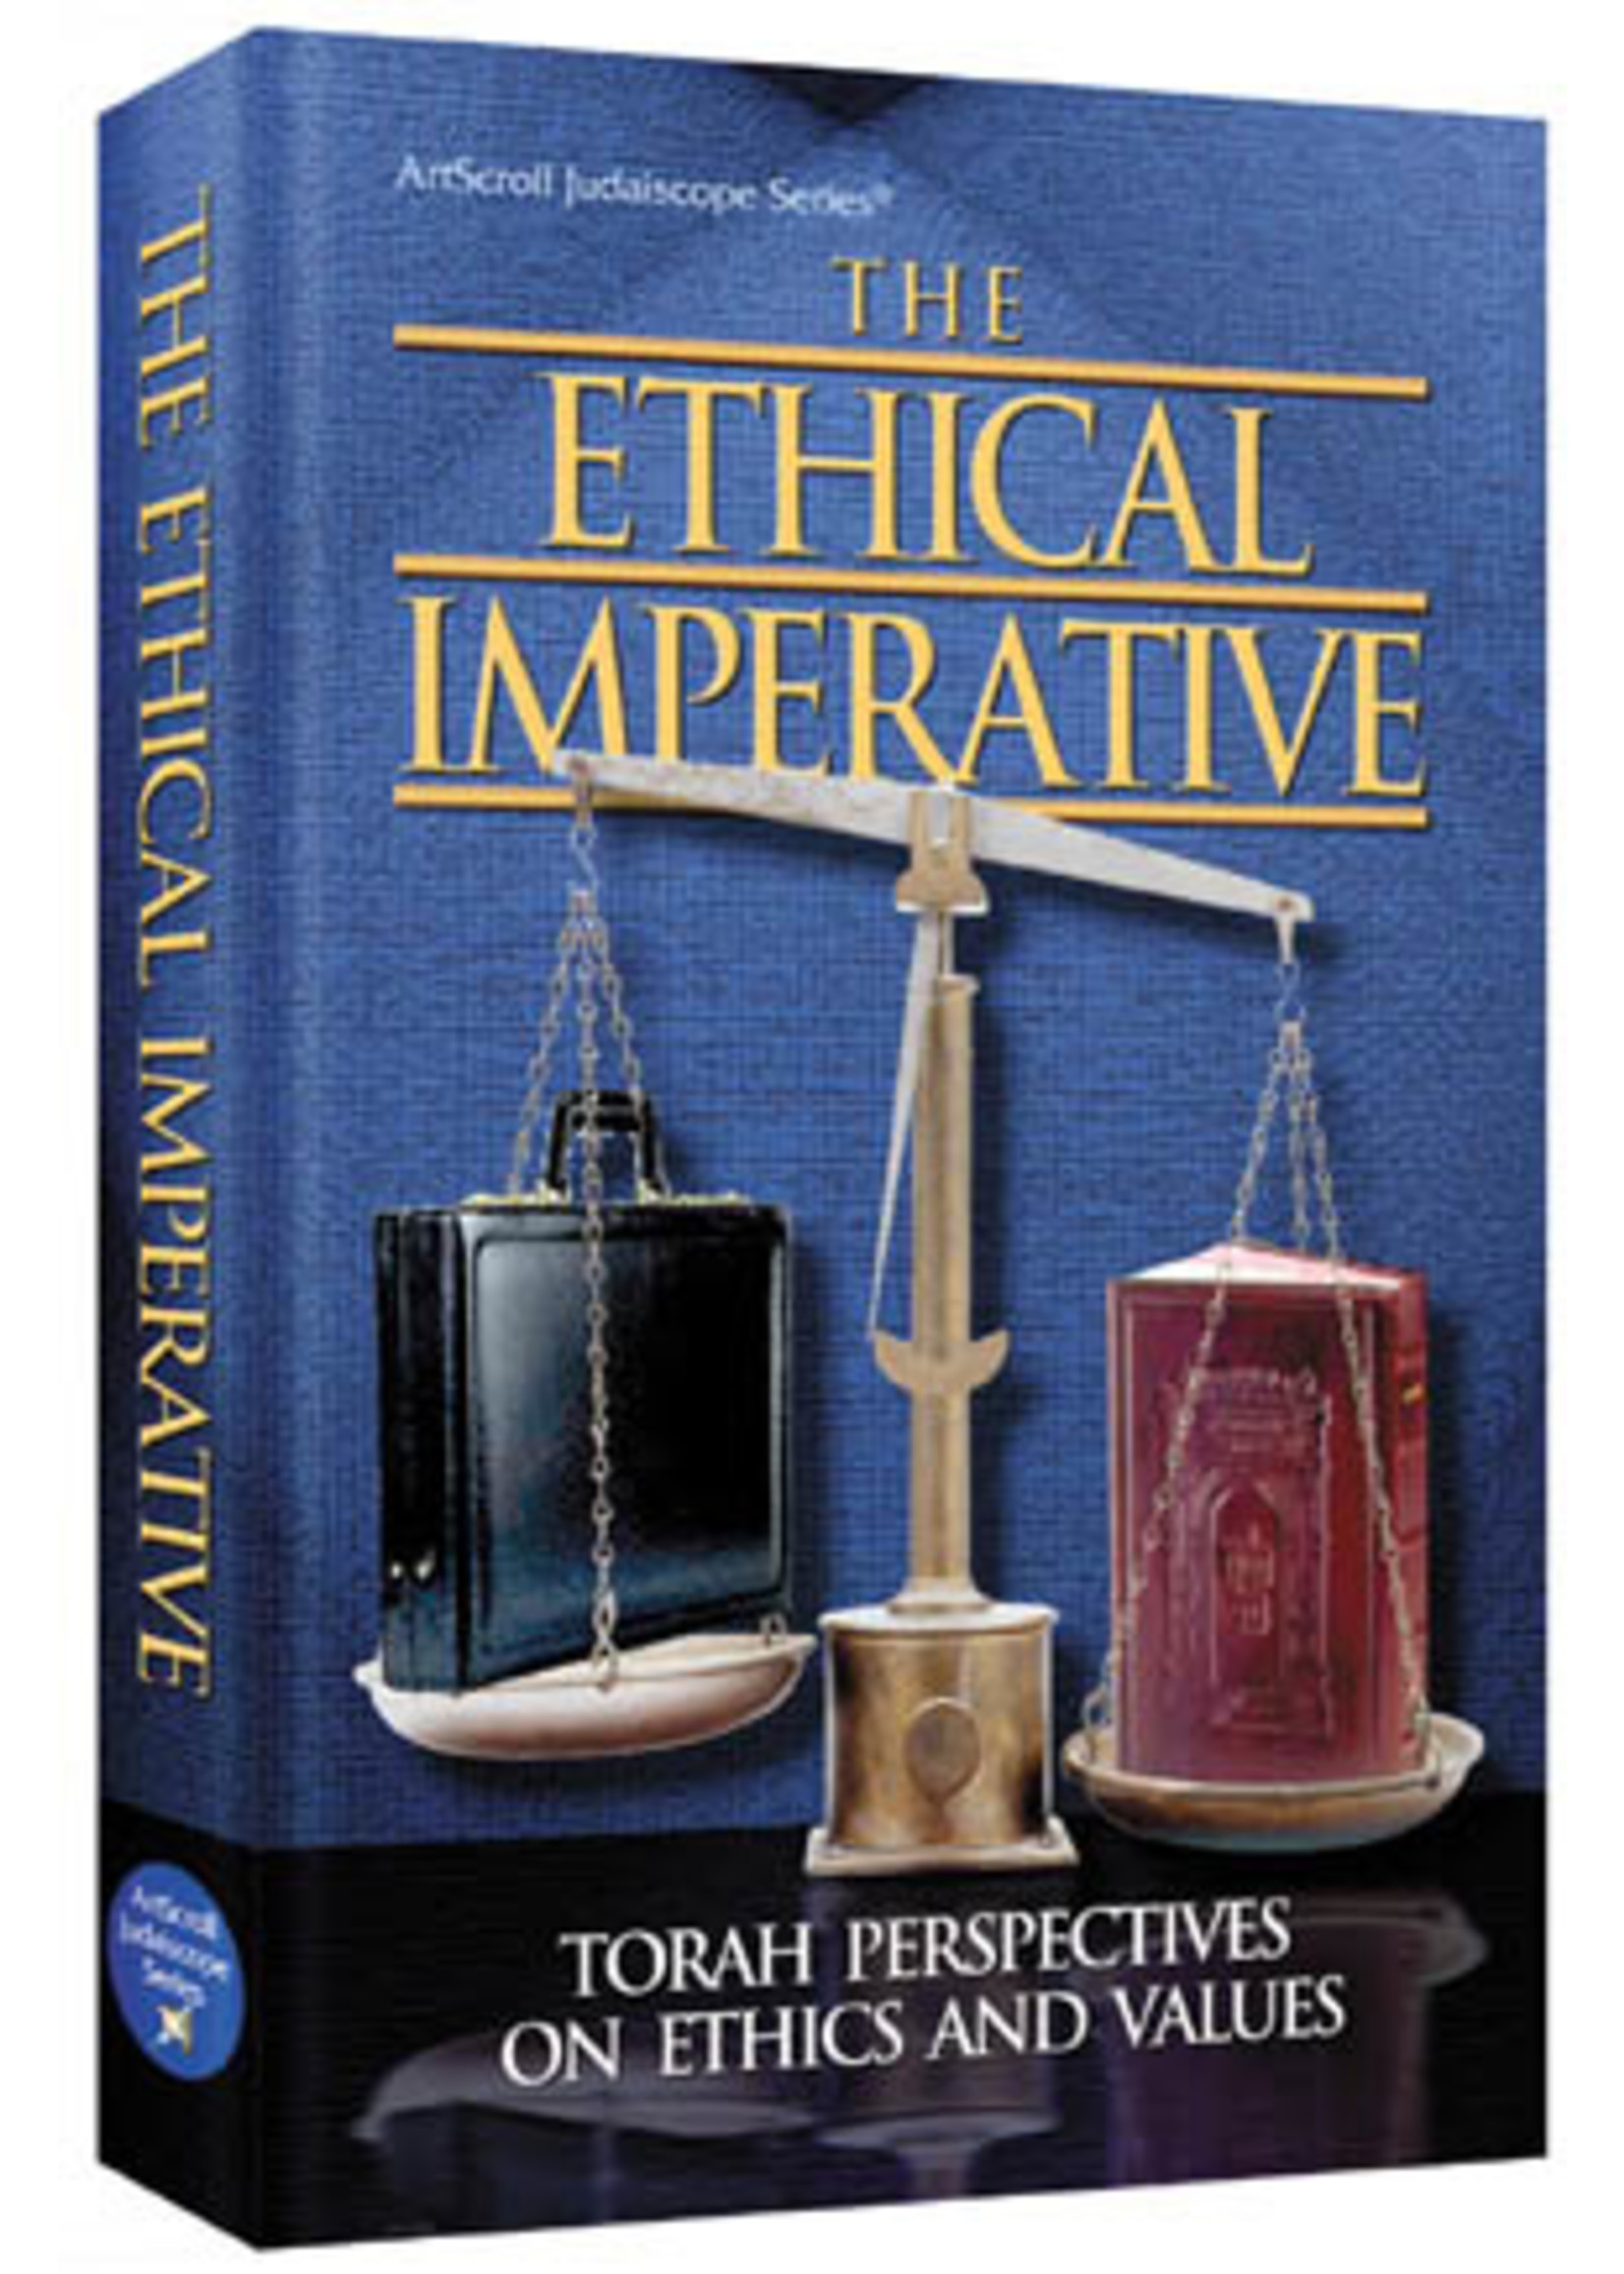 ETHICAL IMPERITIVE H/C